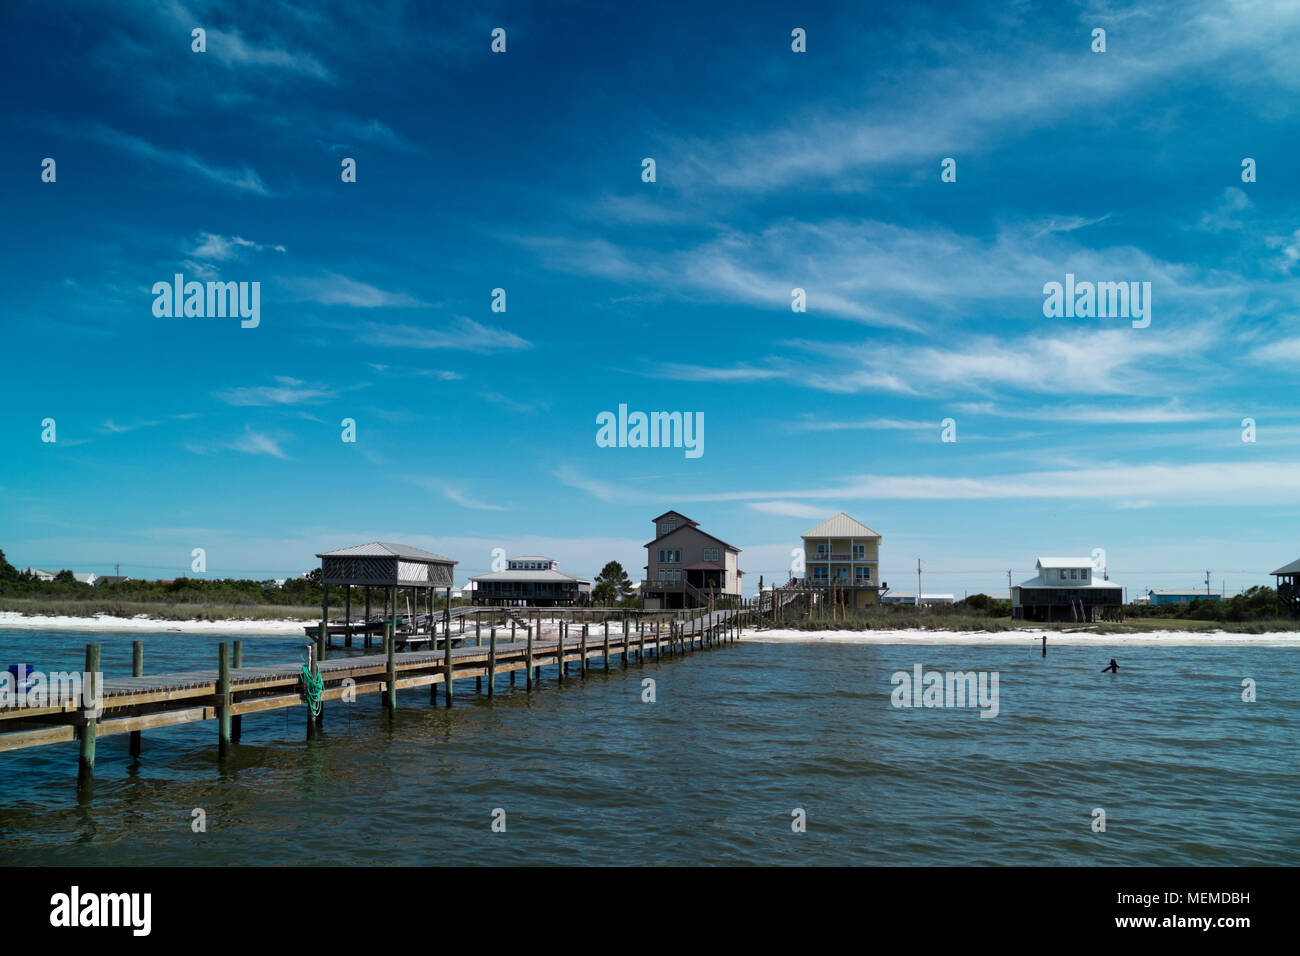 Private homes on the beach of Mobile Bay, Alabama. Stock Photo